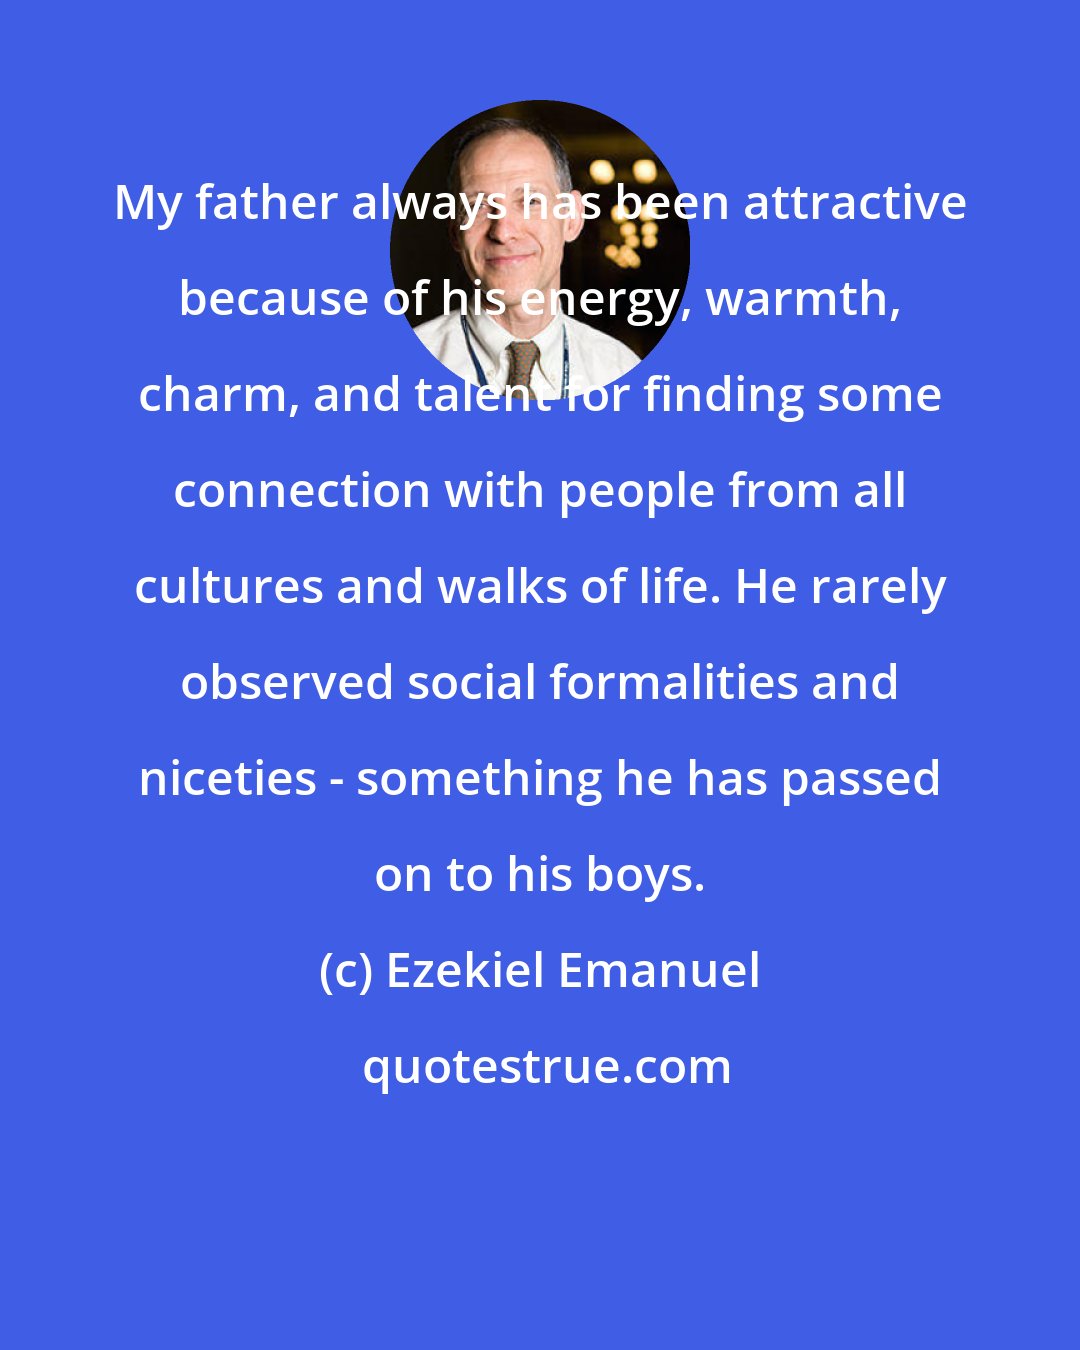 Ezekiel Emanuel: My father always has been attractive because of his energy, warmth, charm, and talent for finding some connection with people from all cultures and walks of life. He rarely observed social formalities and niceties - something he has passed on to his boys.